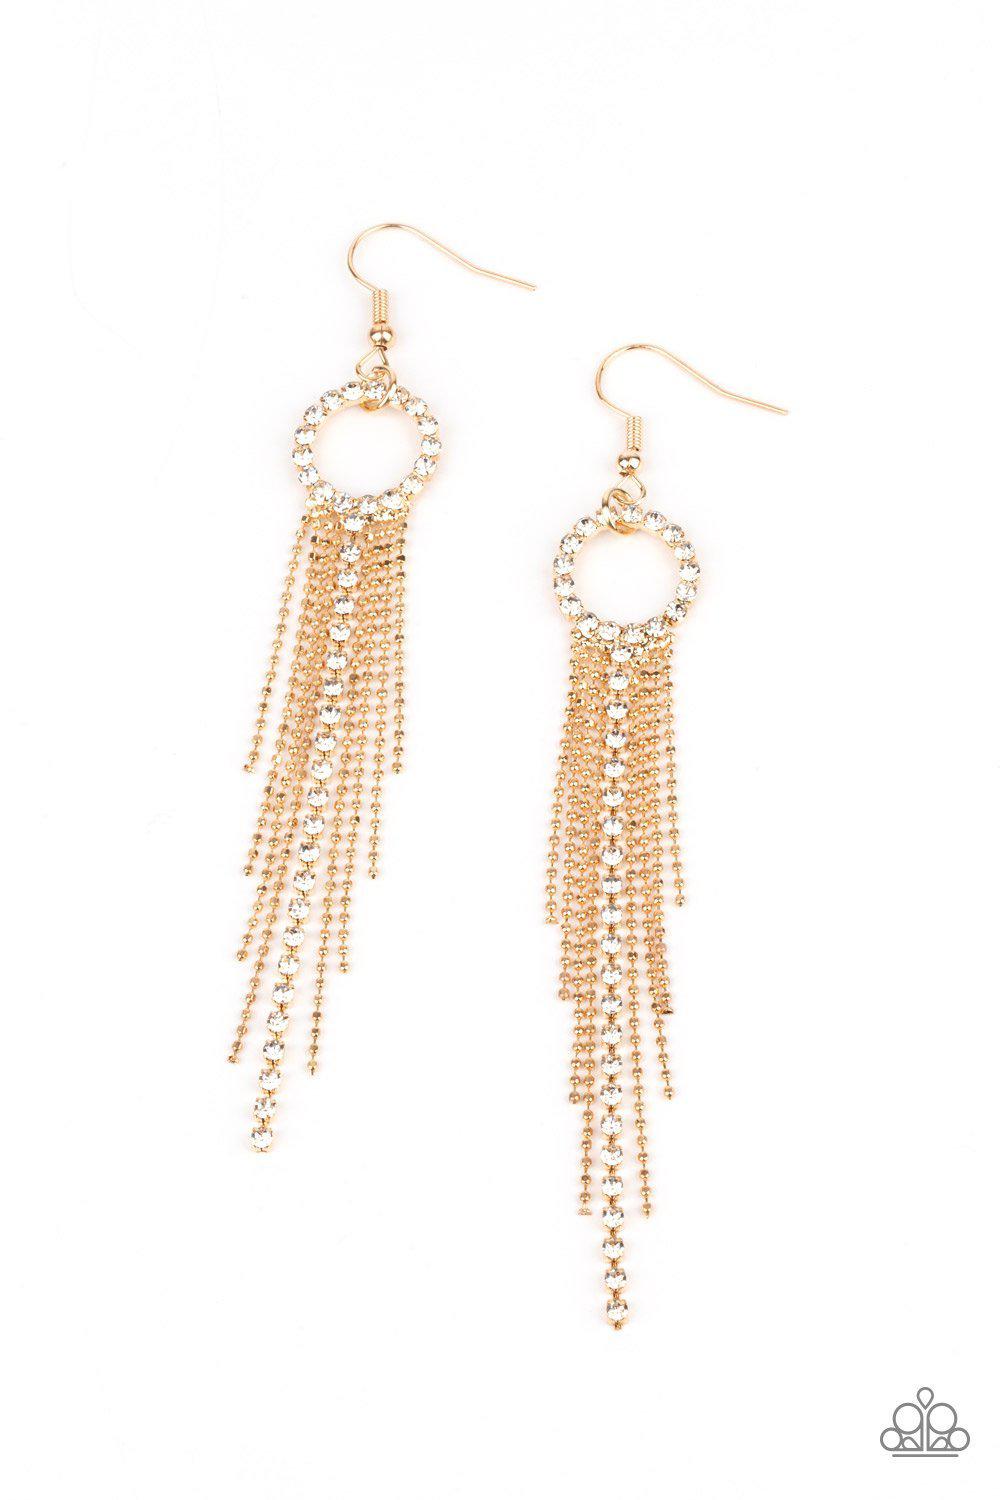 Pass The Glitter Gold and White Rhinestone Earrings - Paparazzi Accessories- lightbox - CarasShop.com - $5 Jewelry by Cara Jewels